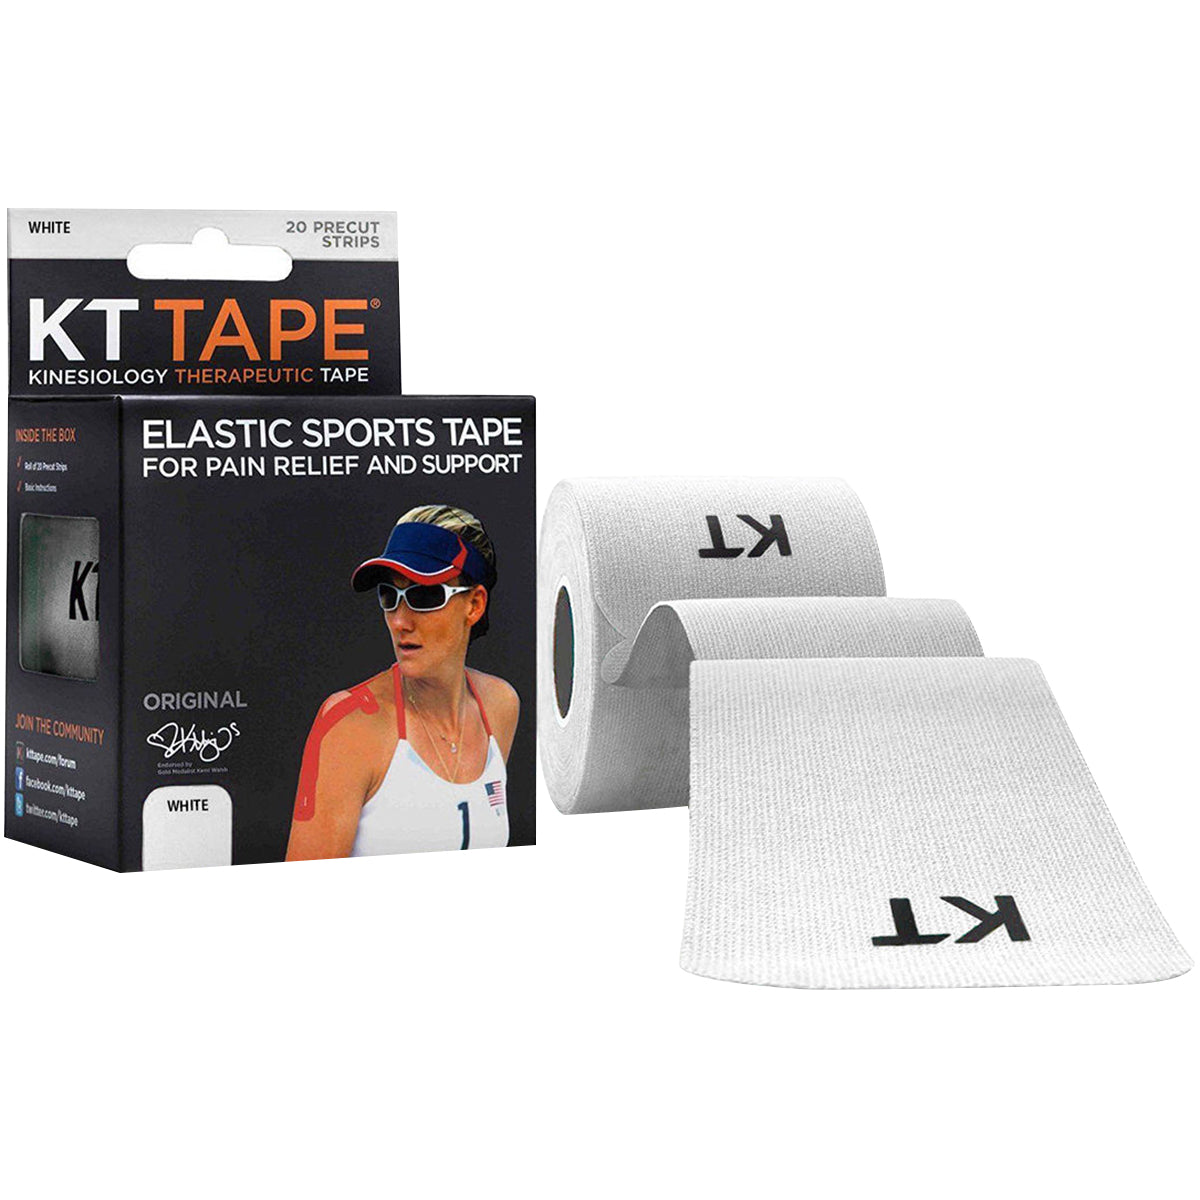 KT Tape Cotton 10" Precut Kinesiology Therapeutic Sports Roll, 20 Strips, White KT Tape